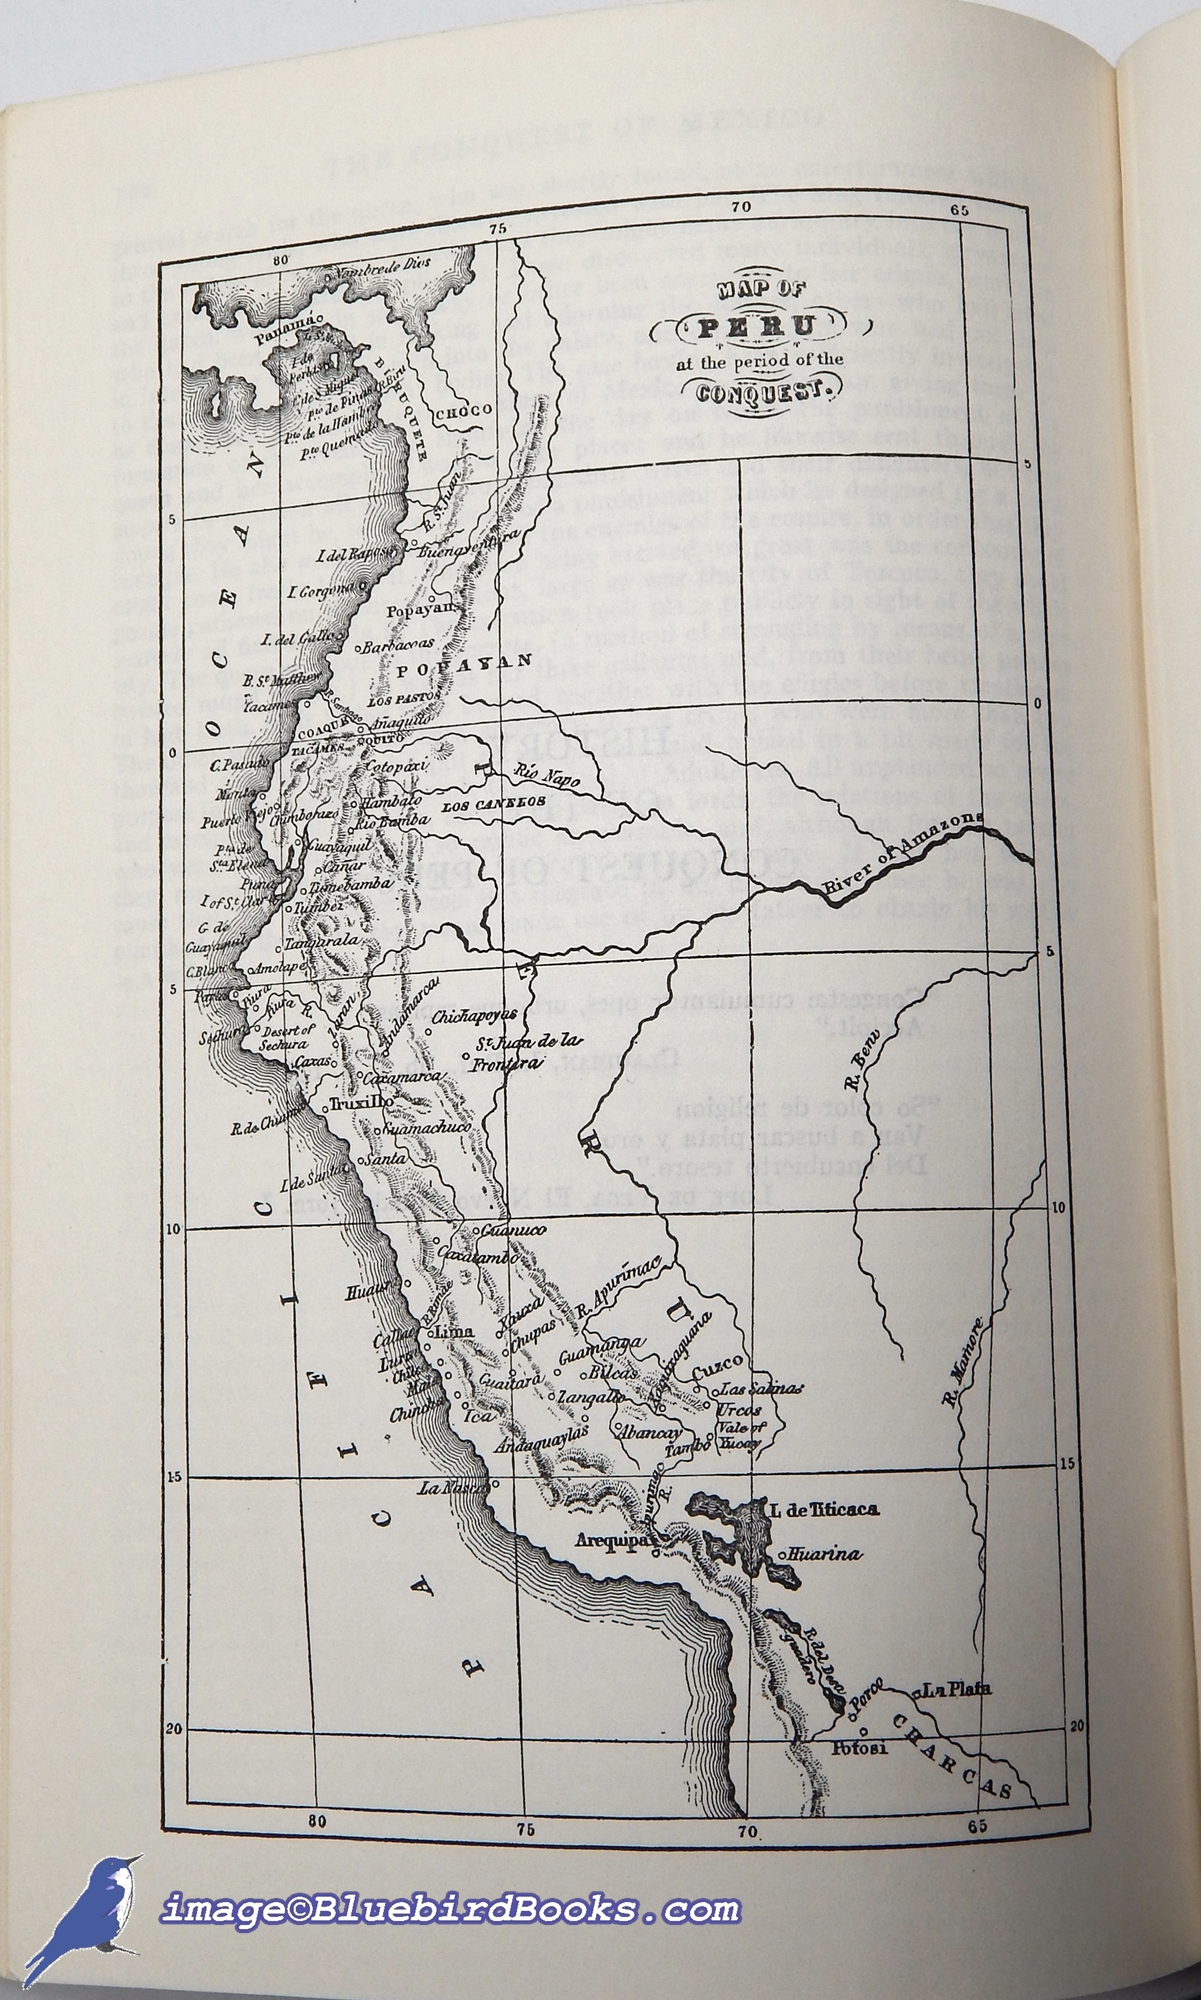 PRESCOTT, WILLIAM H. - The Conquest of Mexico -and- the Conquest of Peru (Modern Library Giant #G29. 1